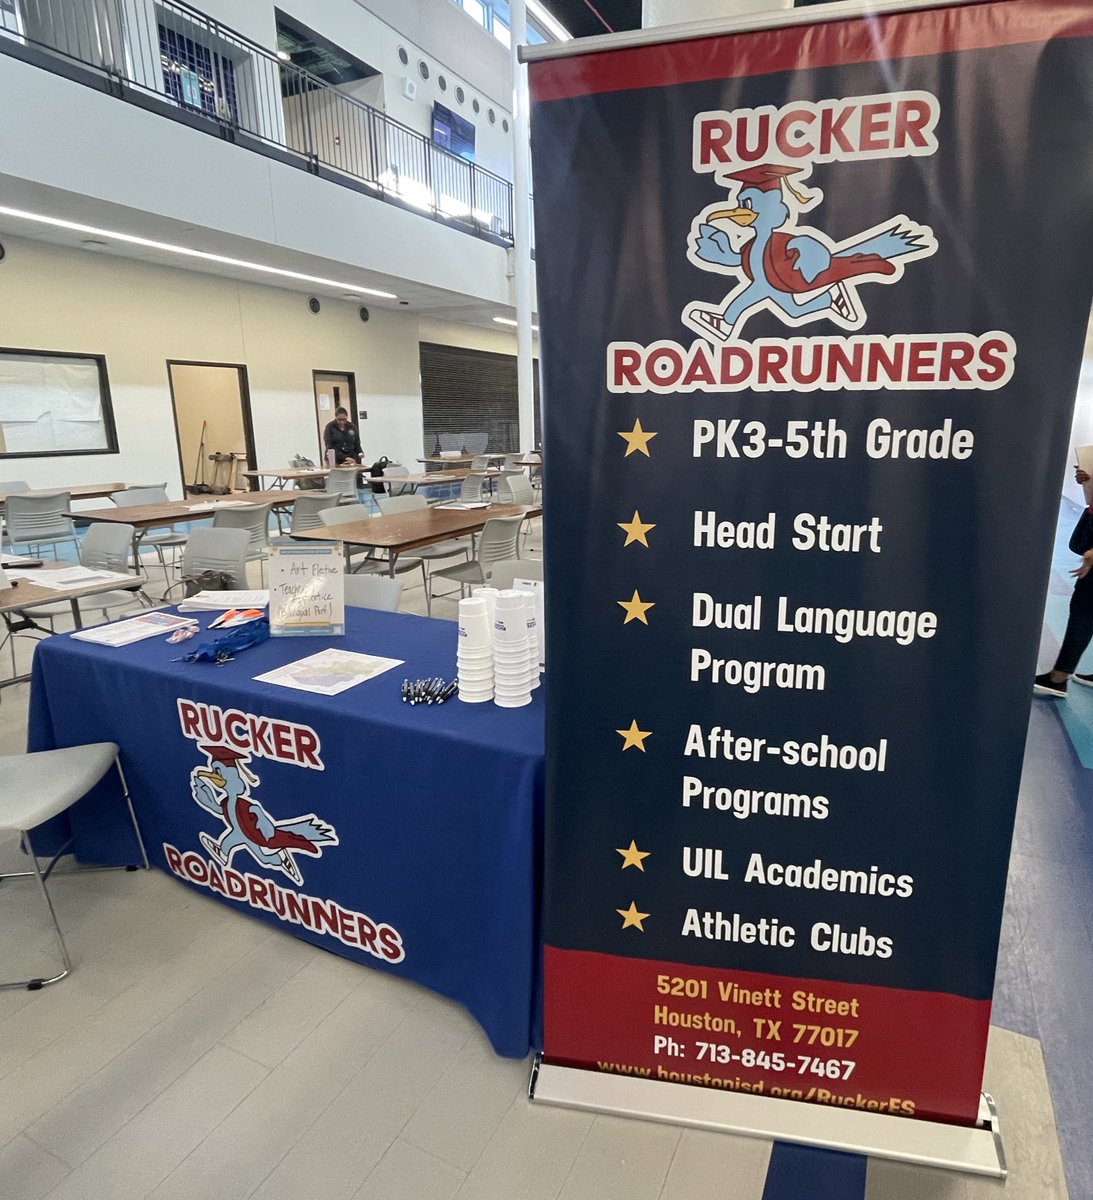 Come see us at the @RuckerHISD table this morning ☀️@Sharpstown_HS ! We are hiring a Teacher Apprentice (Bil. Preferred) and Elective teacher! 🌟 @HisdSouth @TeamHISD @JEOcanas1 @AnnaLWhite1